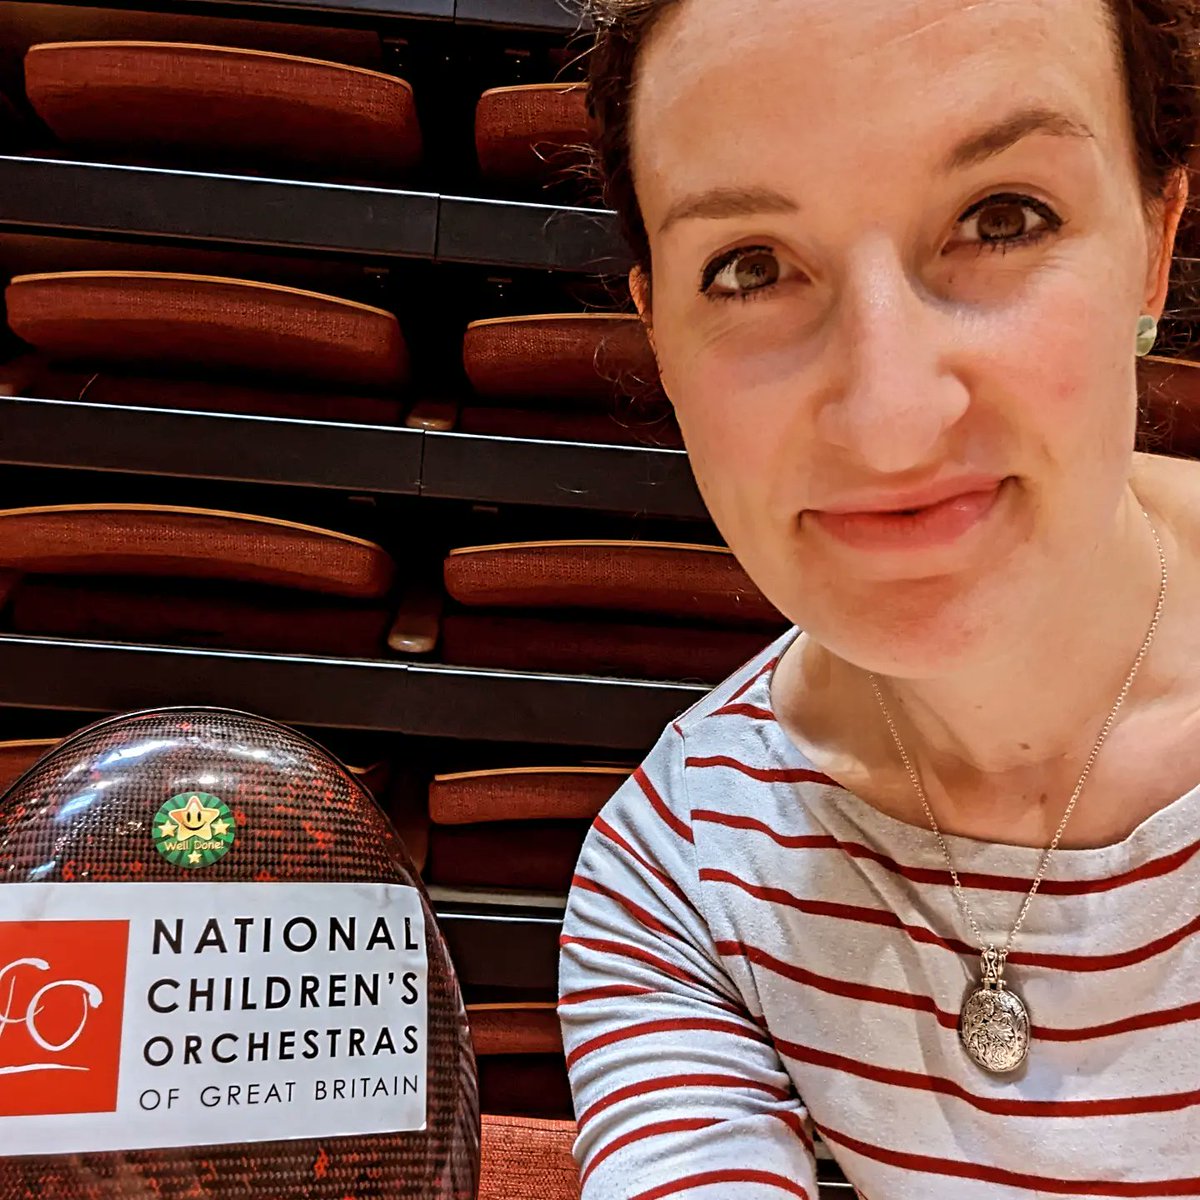 Gorgeous few days @ncogb as Creative Tutor 😍 straight onto @NYO_GB as Creative Director of their concert @TungAuditorium 2 incredible orgs nurturing creativity as a core identity of the future of classical music 🙌🙌🙌 #innovate #catalyst #futureofmusic